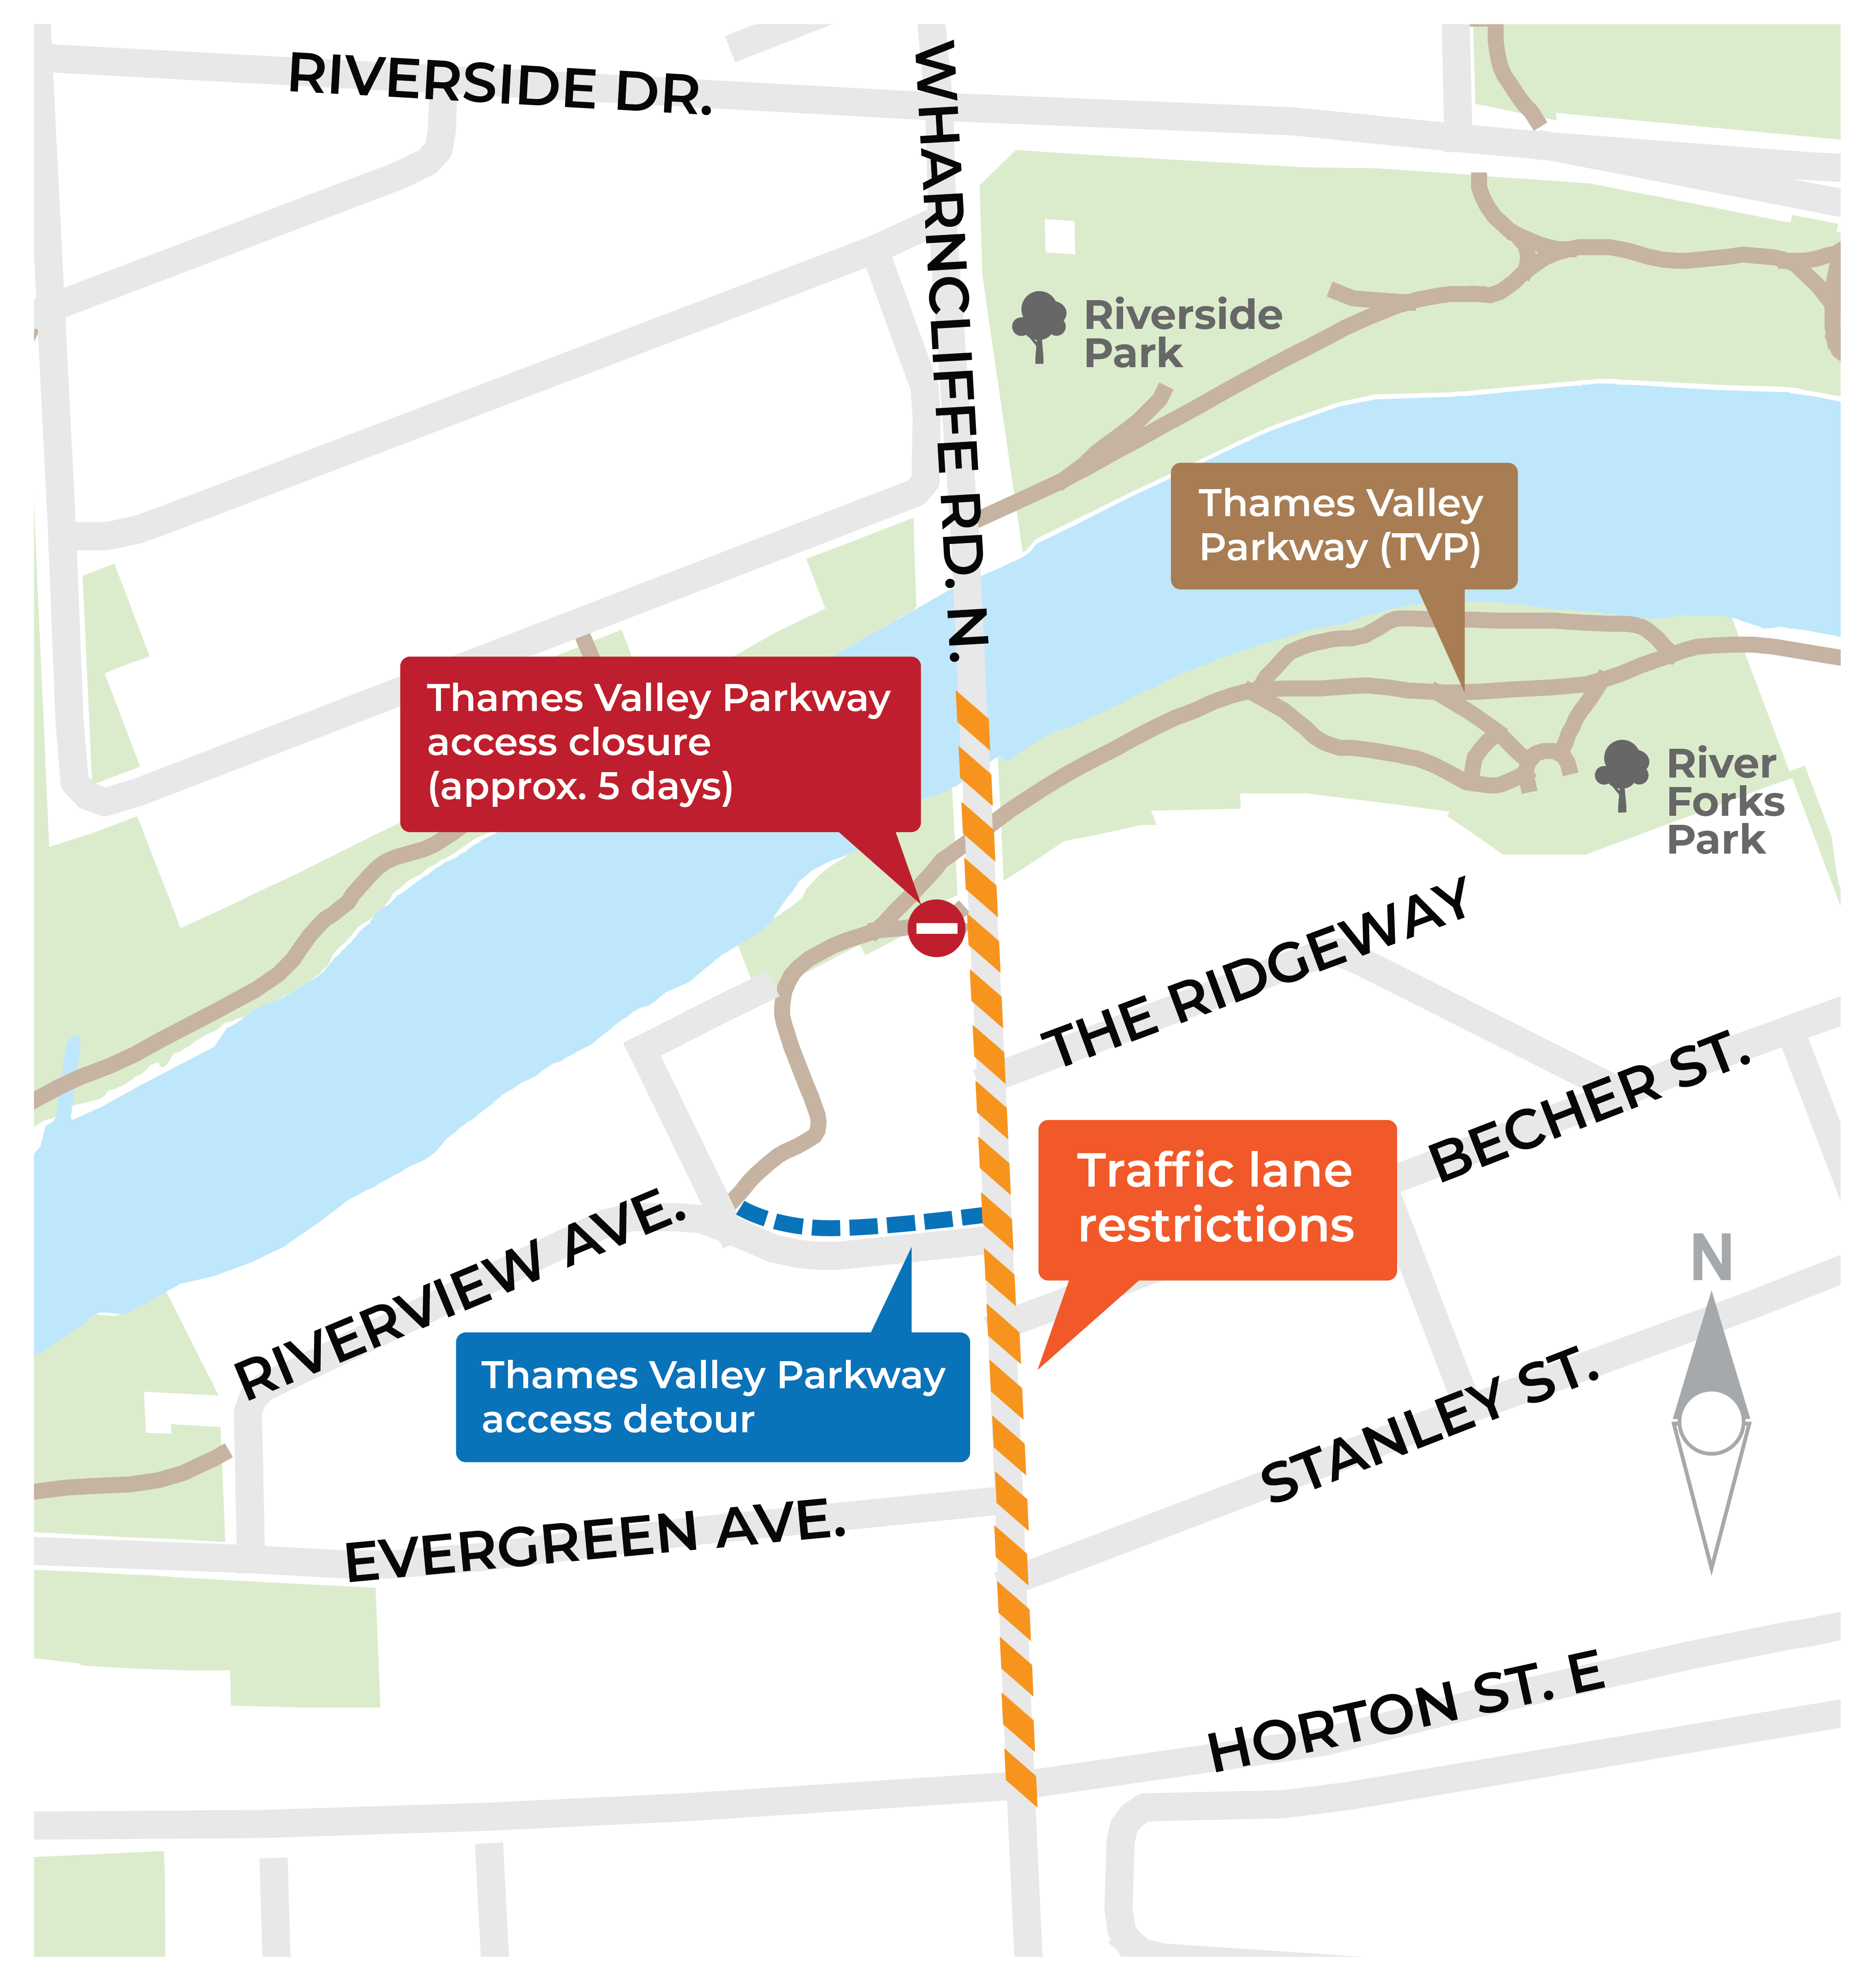 Starting November 9, Wharncliffe Road will have lane restrictions from Horton Street to the Thames River (just north of the Ridgeway.) The TVP Wharncliffe Road entrance will also be closed on November 9 for approximately five days. For more information, please contact Garfield Dales at gdales@london.ca or by calling 519-661-2489 x4637 